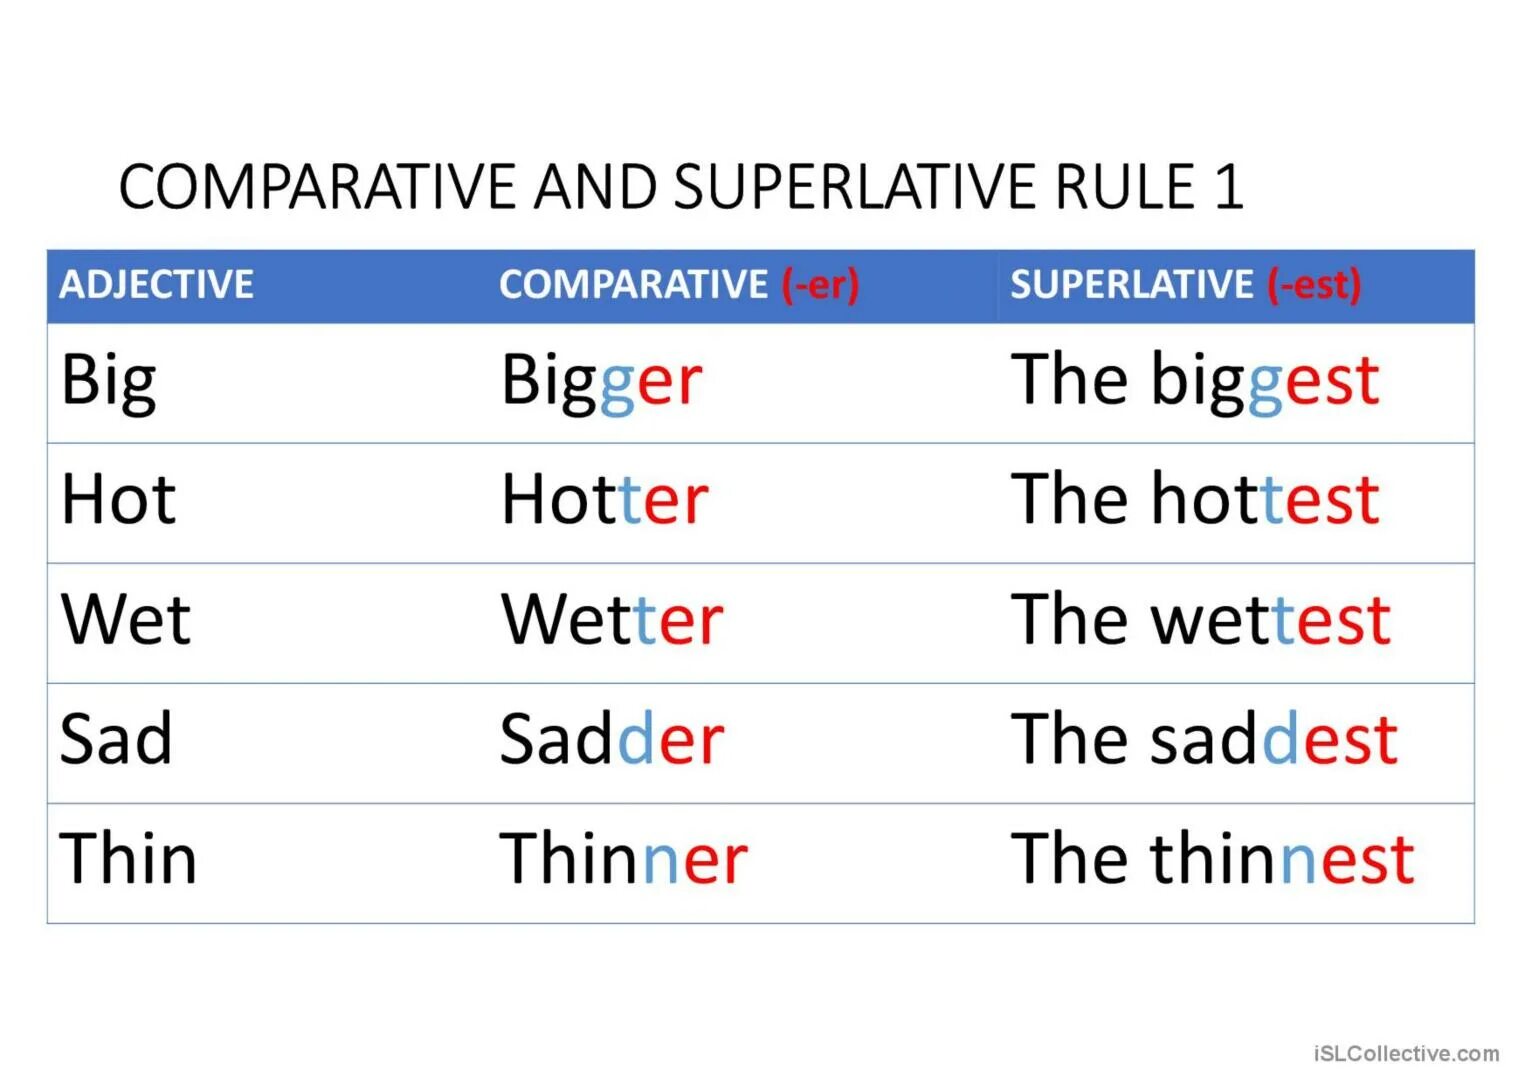 Comparatives and Superlatives правило. Comparative and Superlative adjectives правила. Comparative and Superlative adjectives правило. Superlative adjectives правило. Adjectives на русском